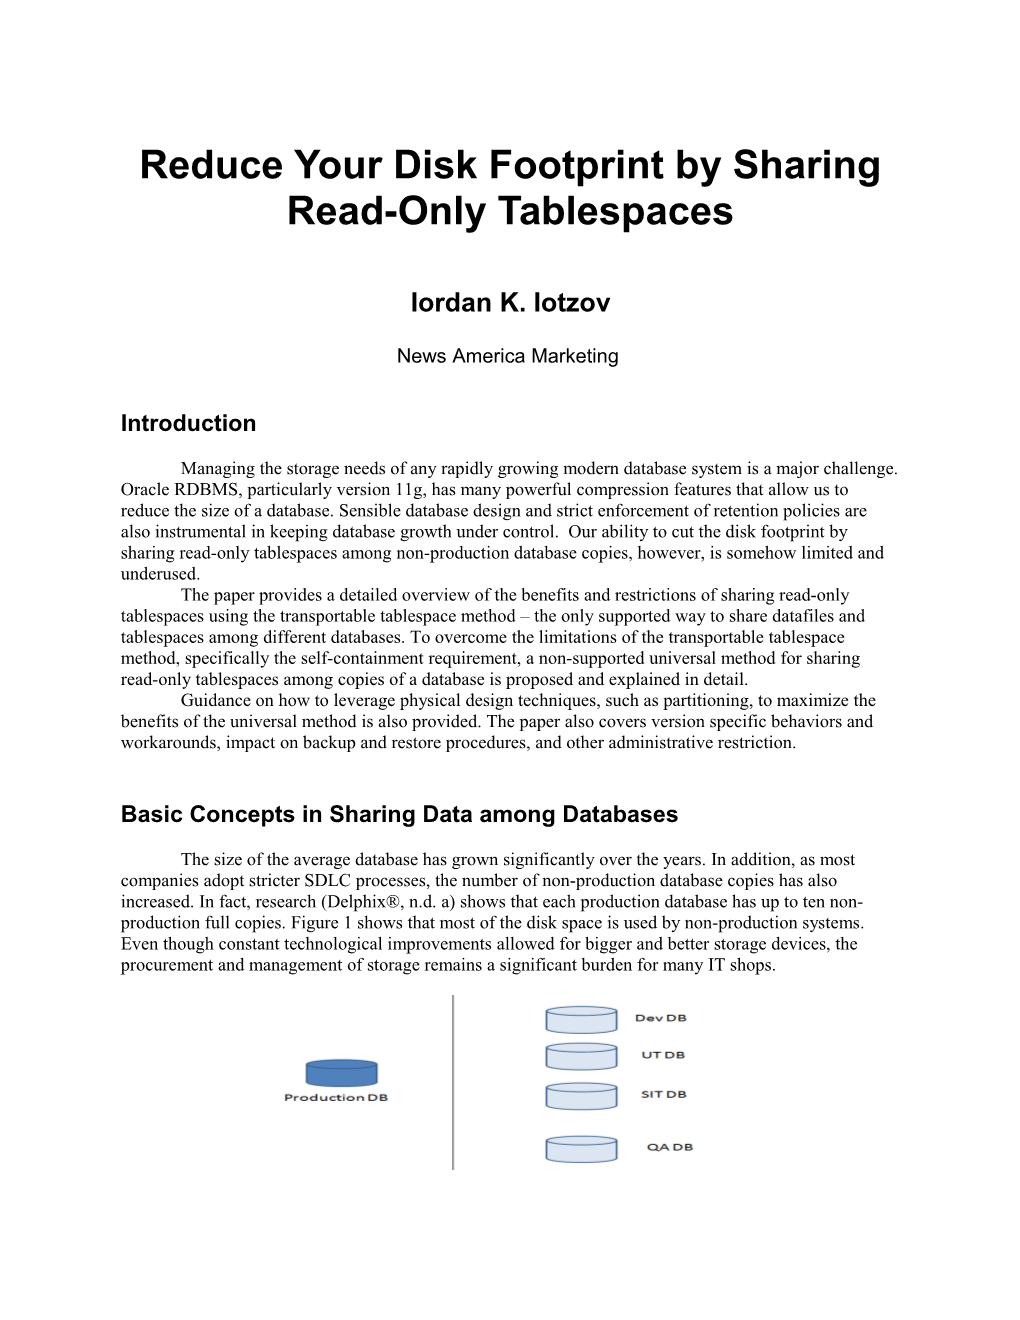 Reduce Your Disk Footprint by Sharing Read-Only Tablespaces